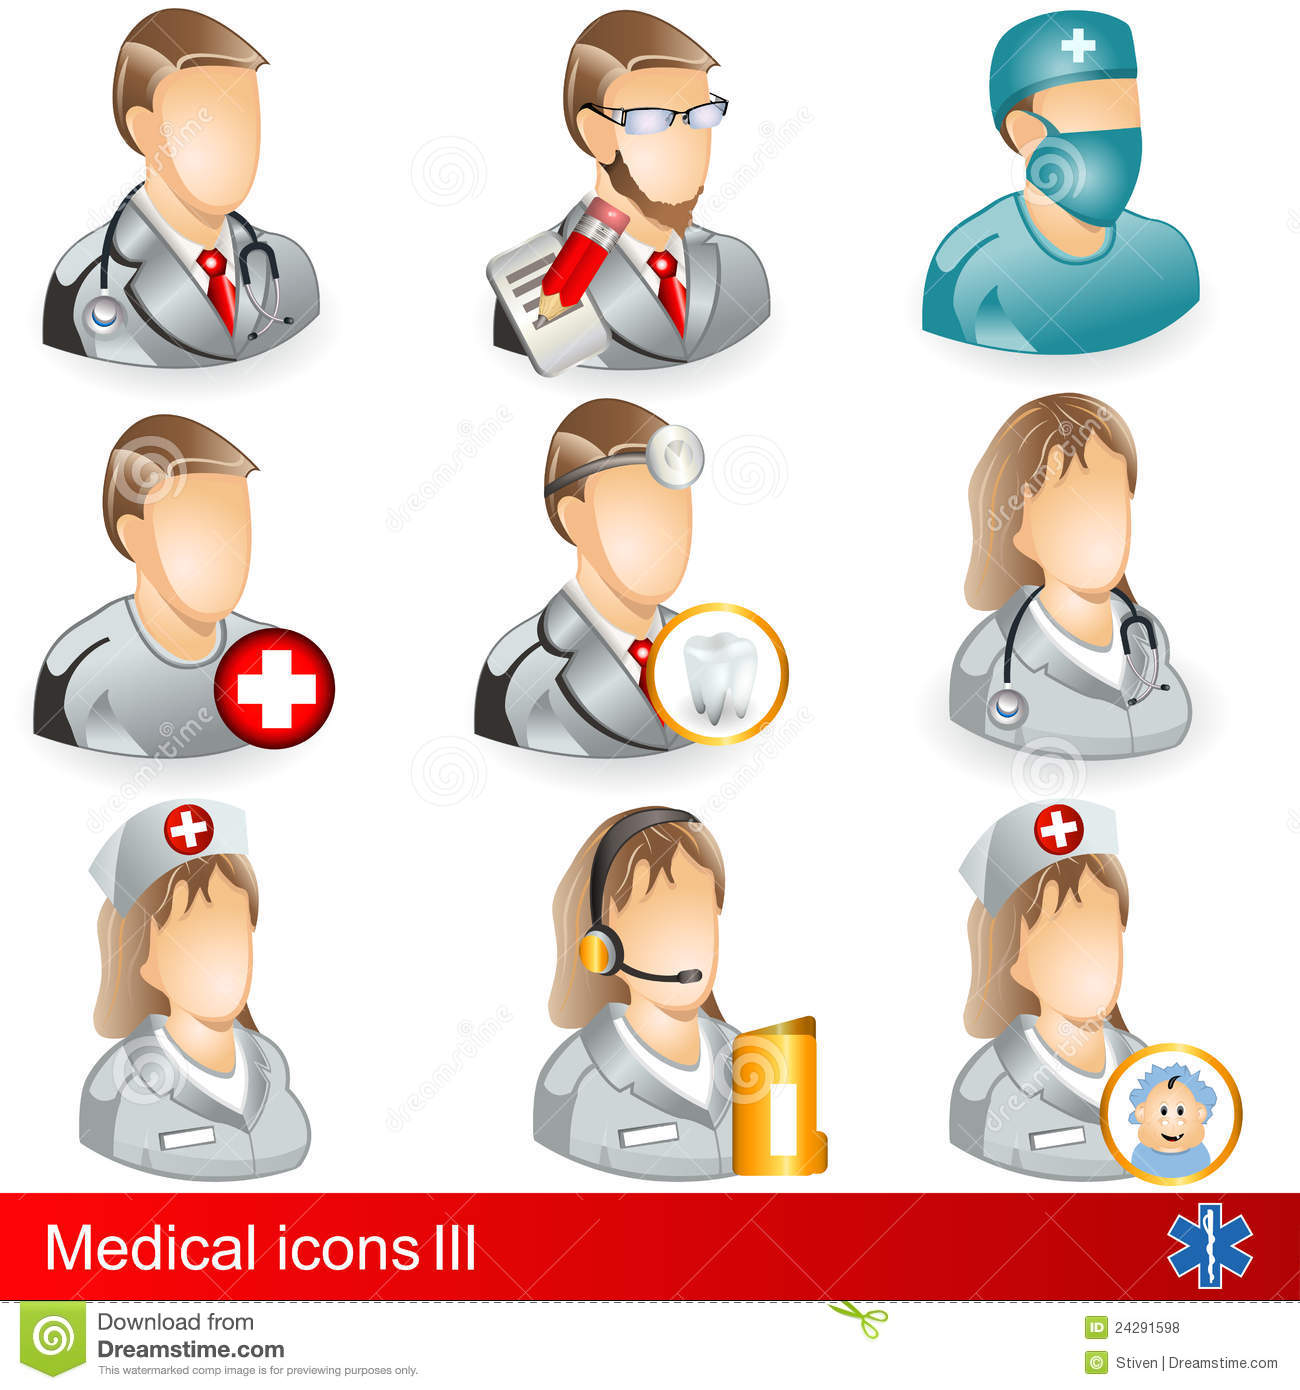 Free Medical Icons